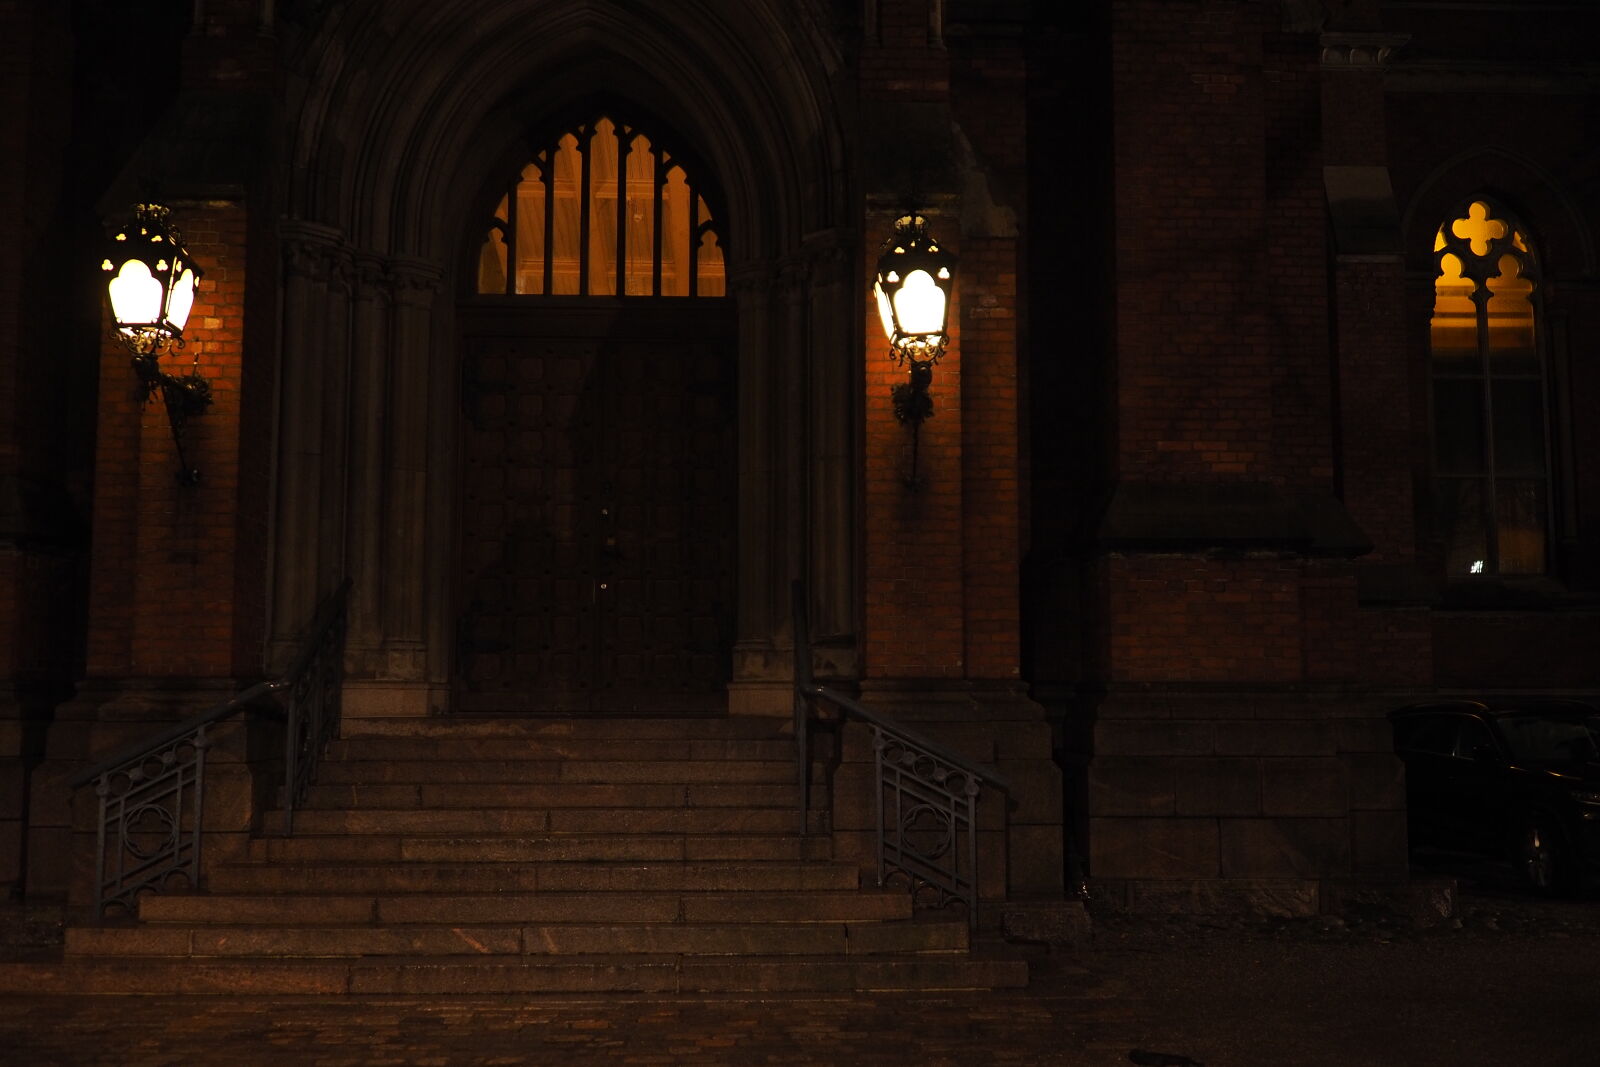 Olympus PEN E-PL10 sample photo. The haunted church stairs photography